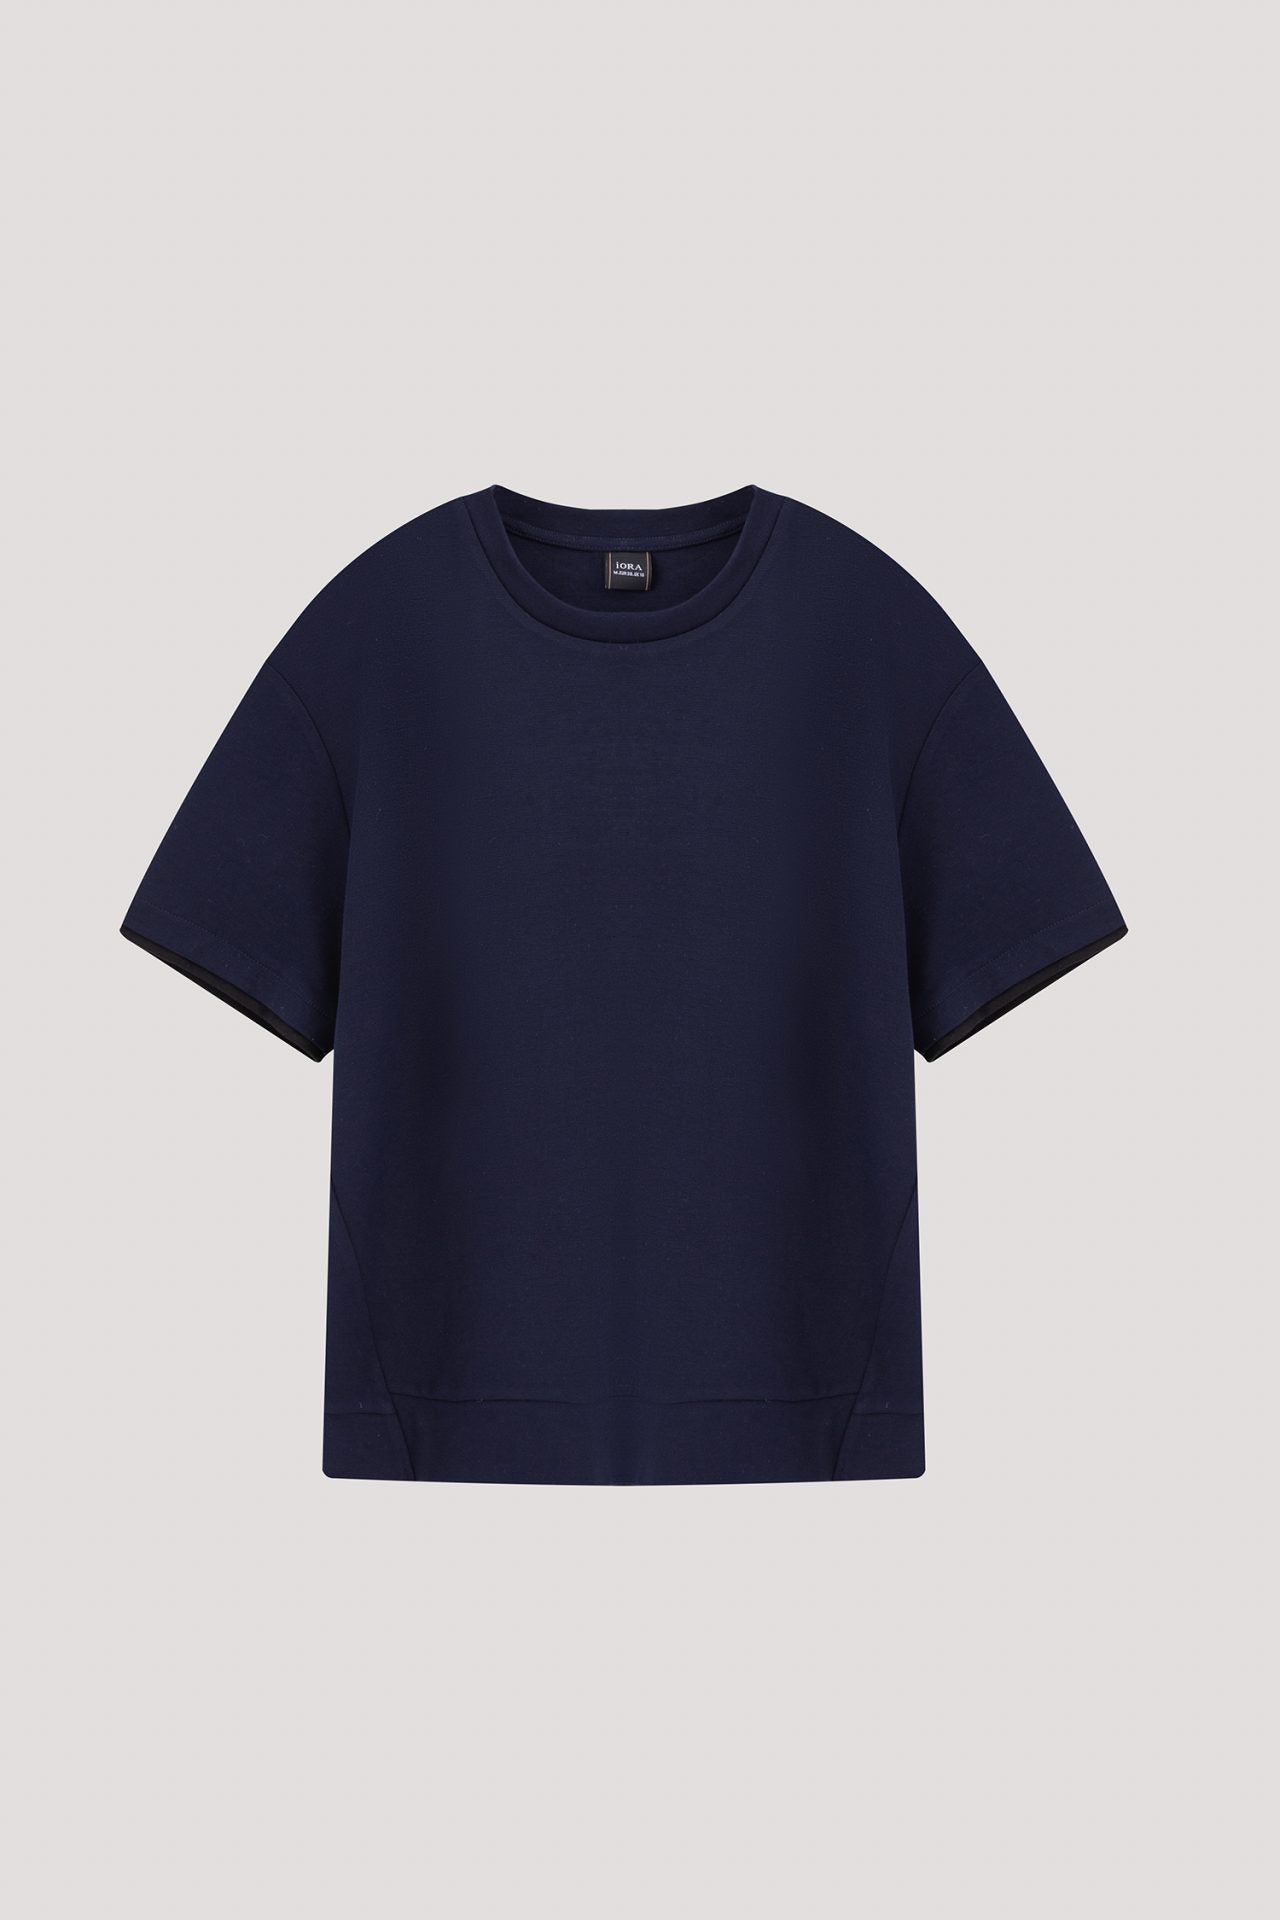 AT 11105 CONTRAST TRIMMING TOP NAVY